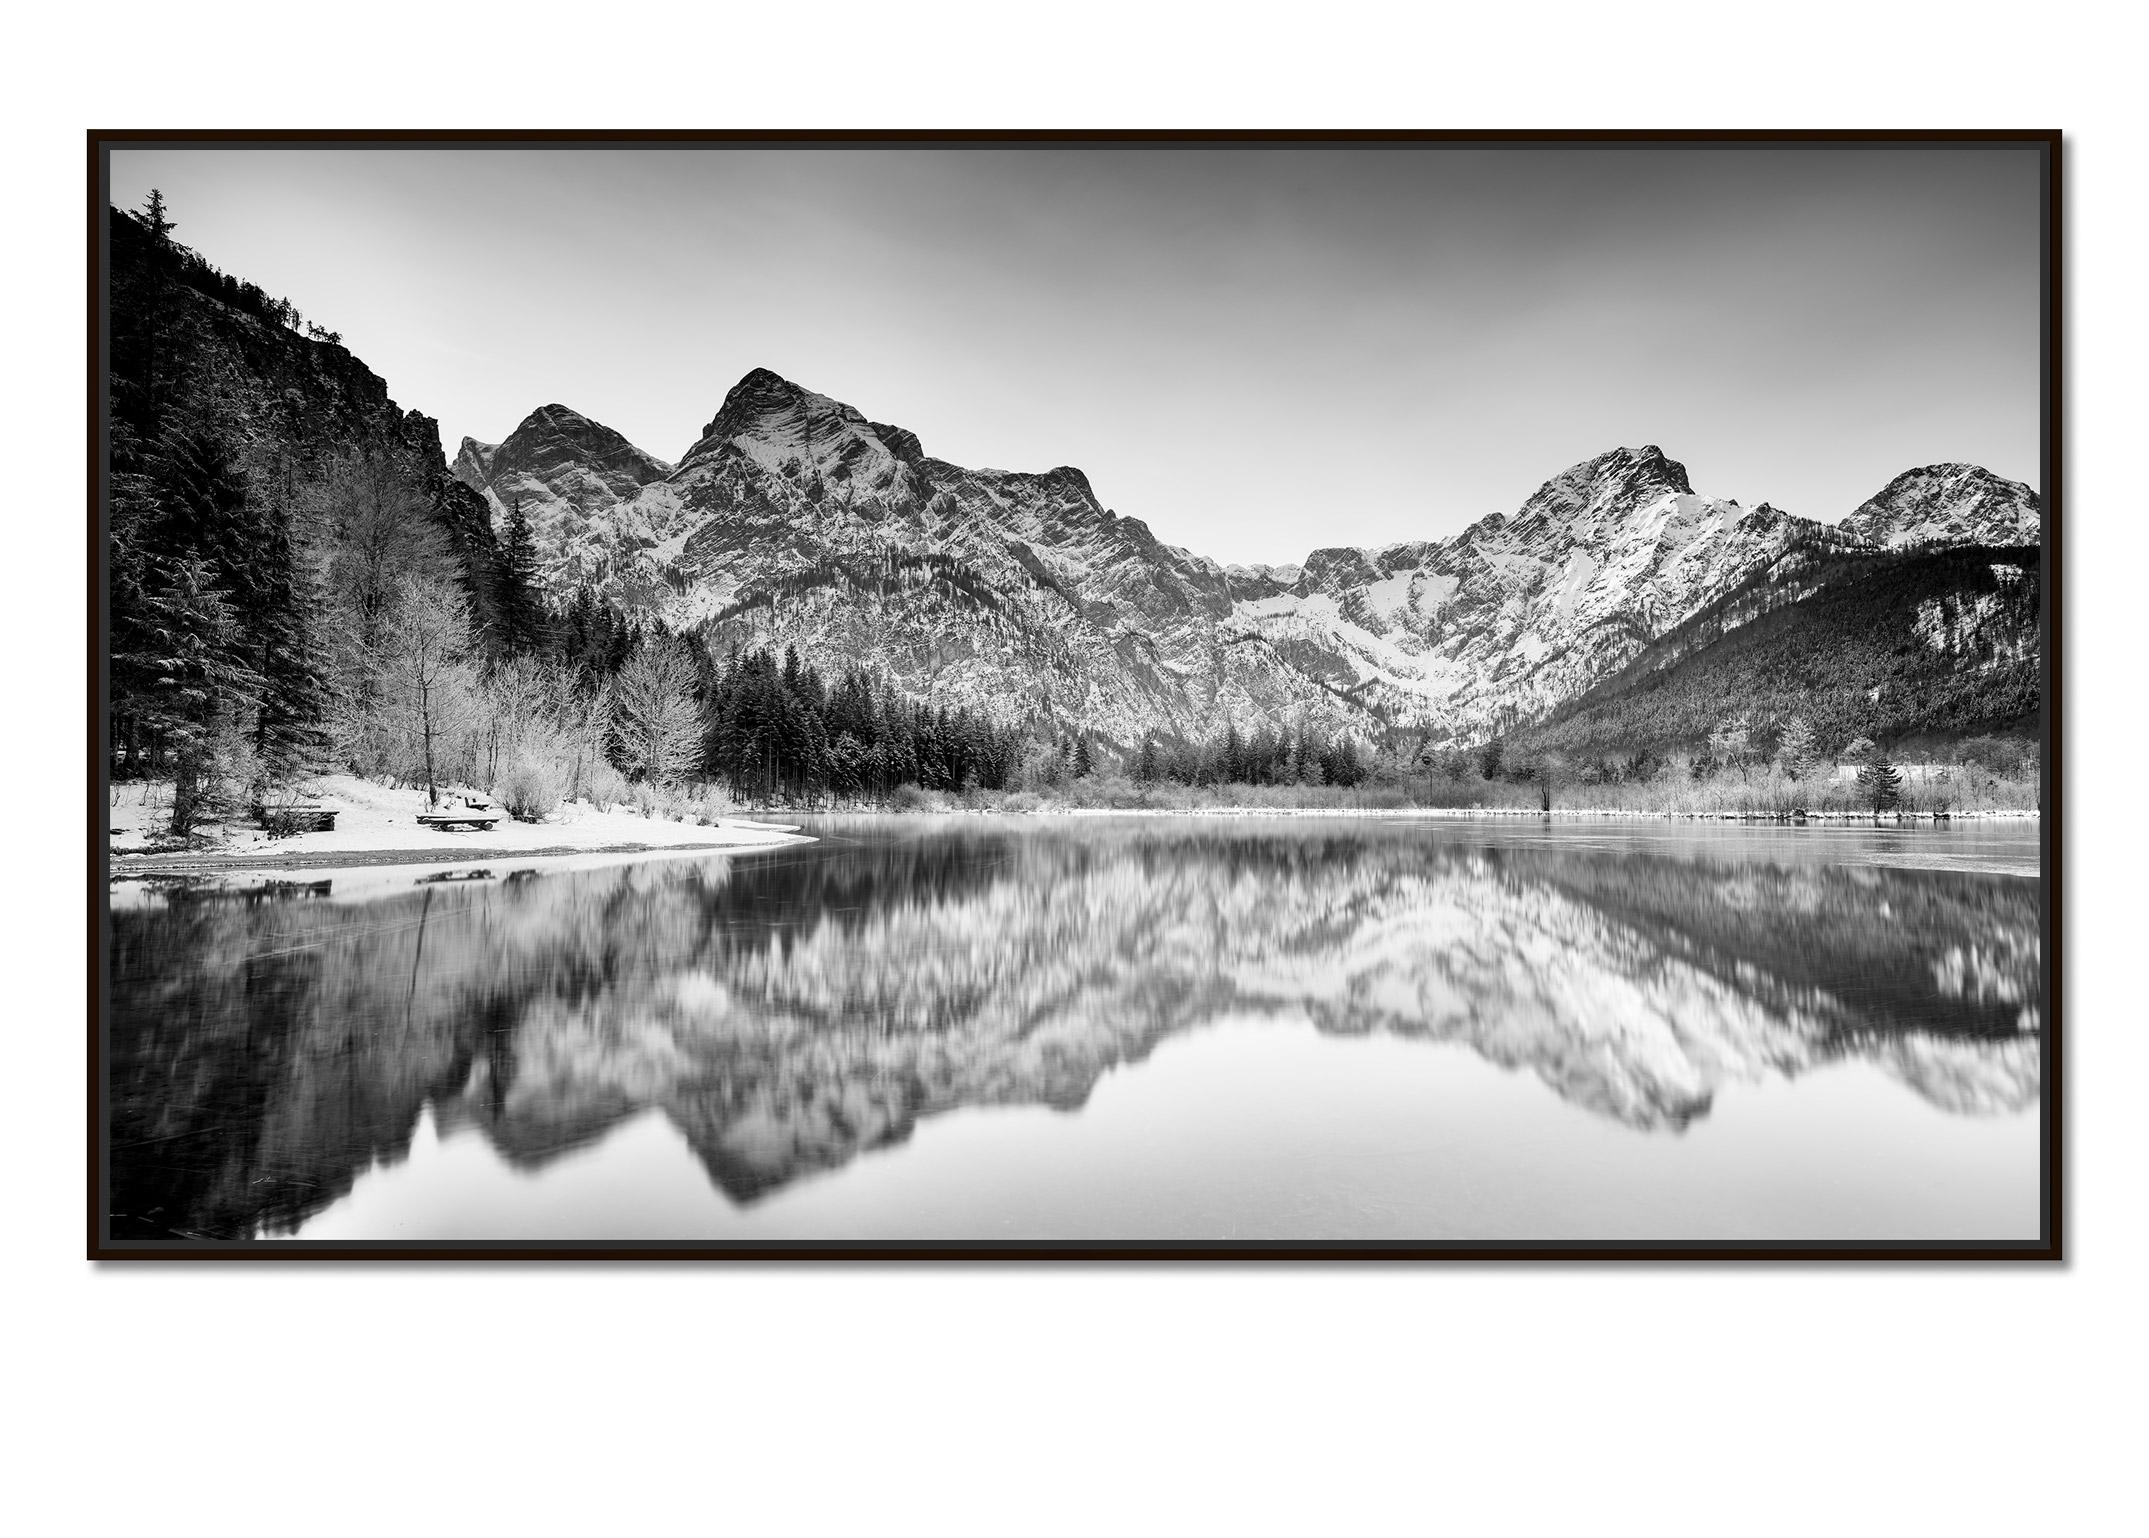 Lakeside, Winter Panorama, Black and white fine art photography, water landscape - Photograph by Gerald Berghammer